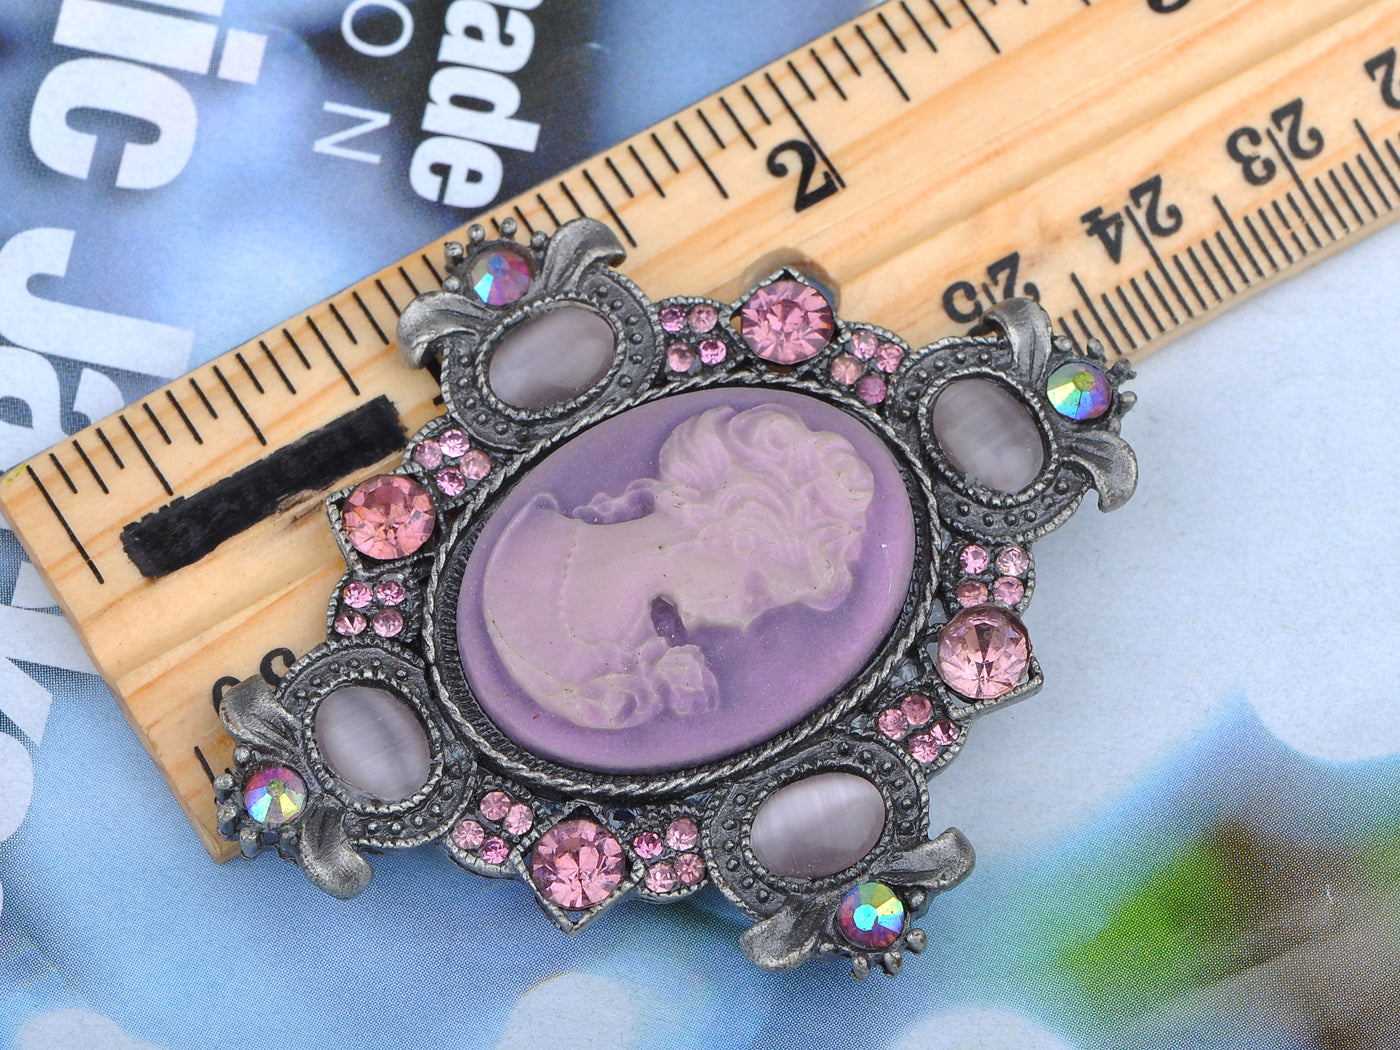 Dual Function Cameo Maid Pin Brooch Necklace Pendant